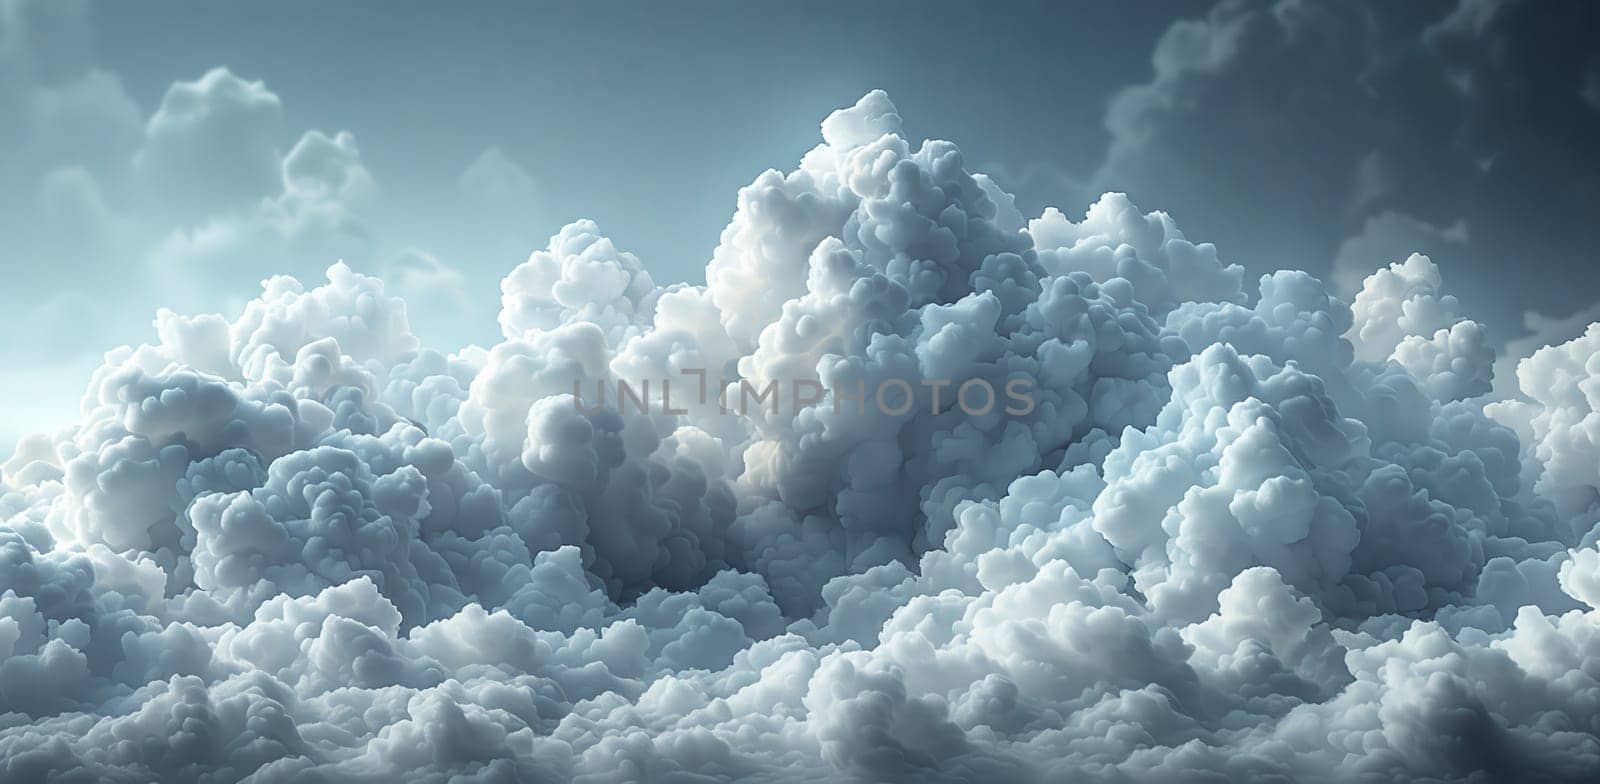 The natural landscape was filled with a cloudy sky, dominated by cumulus clouds. The meteorological phenomenon created an electric blue backdrop, adding a sense of depth to the horizon